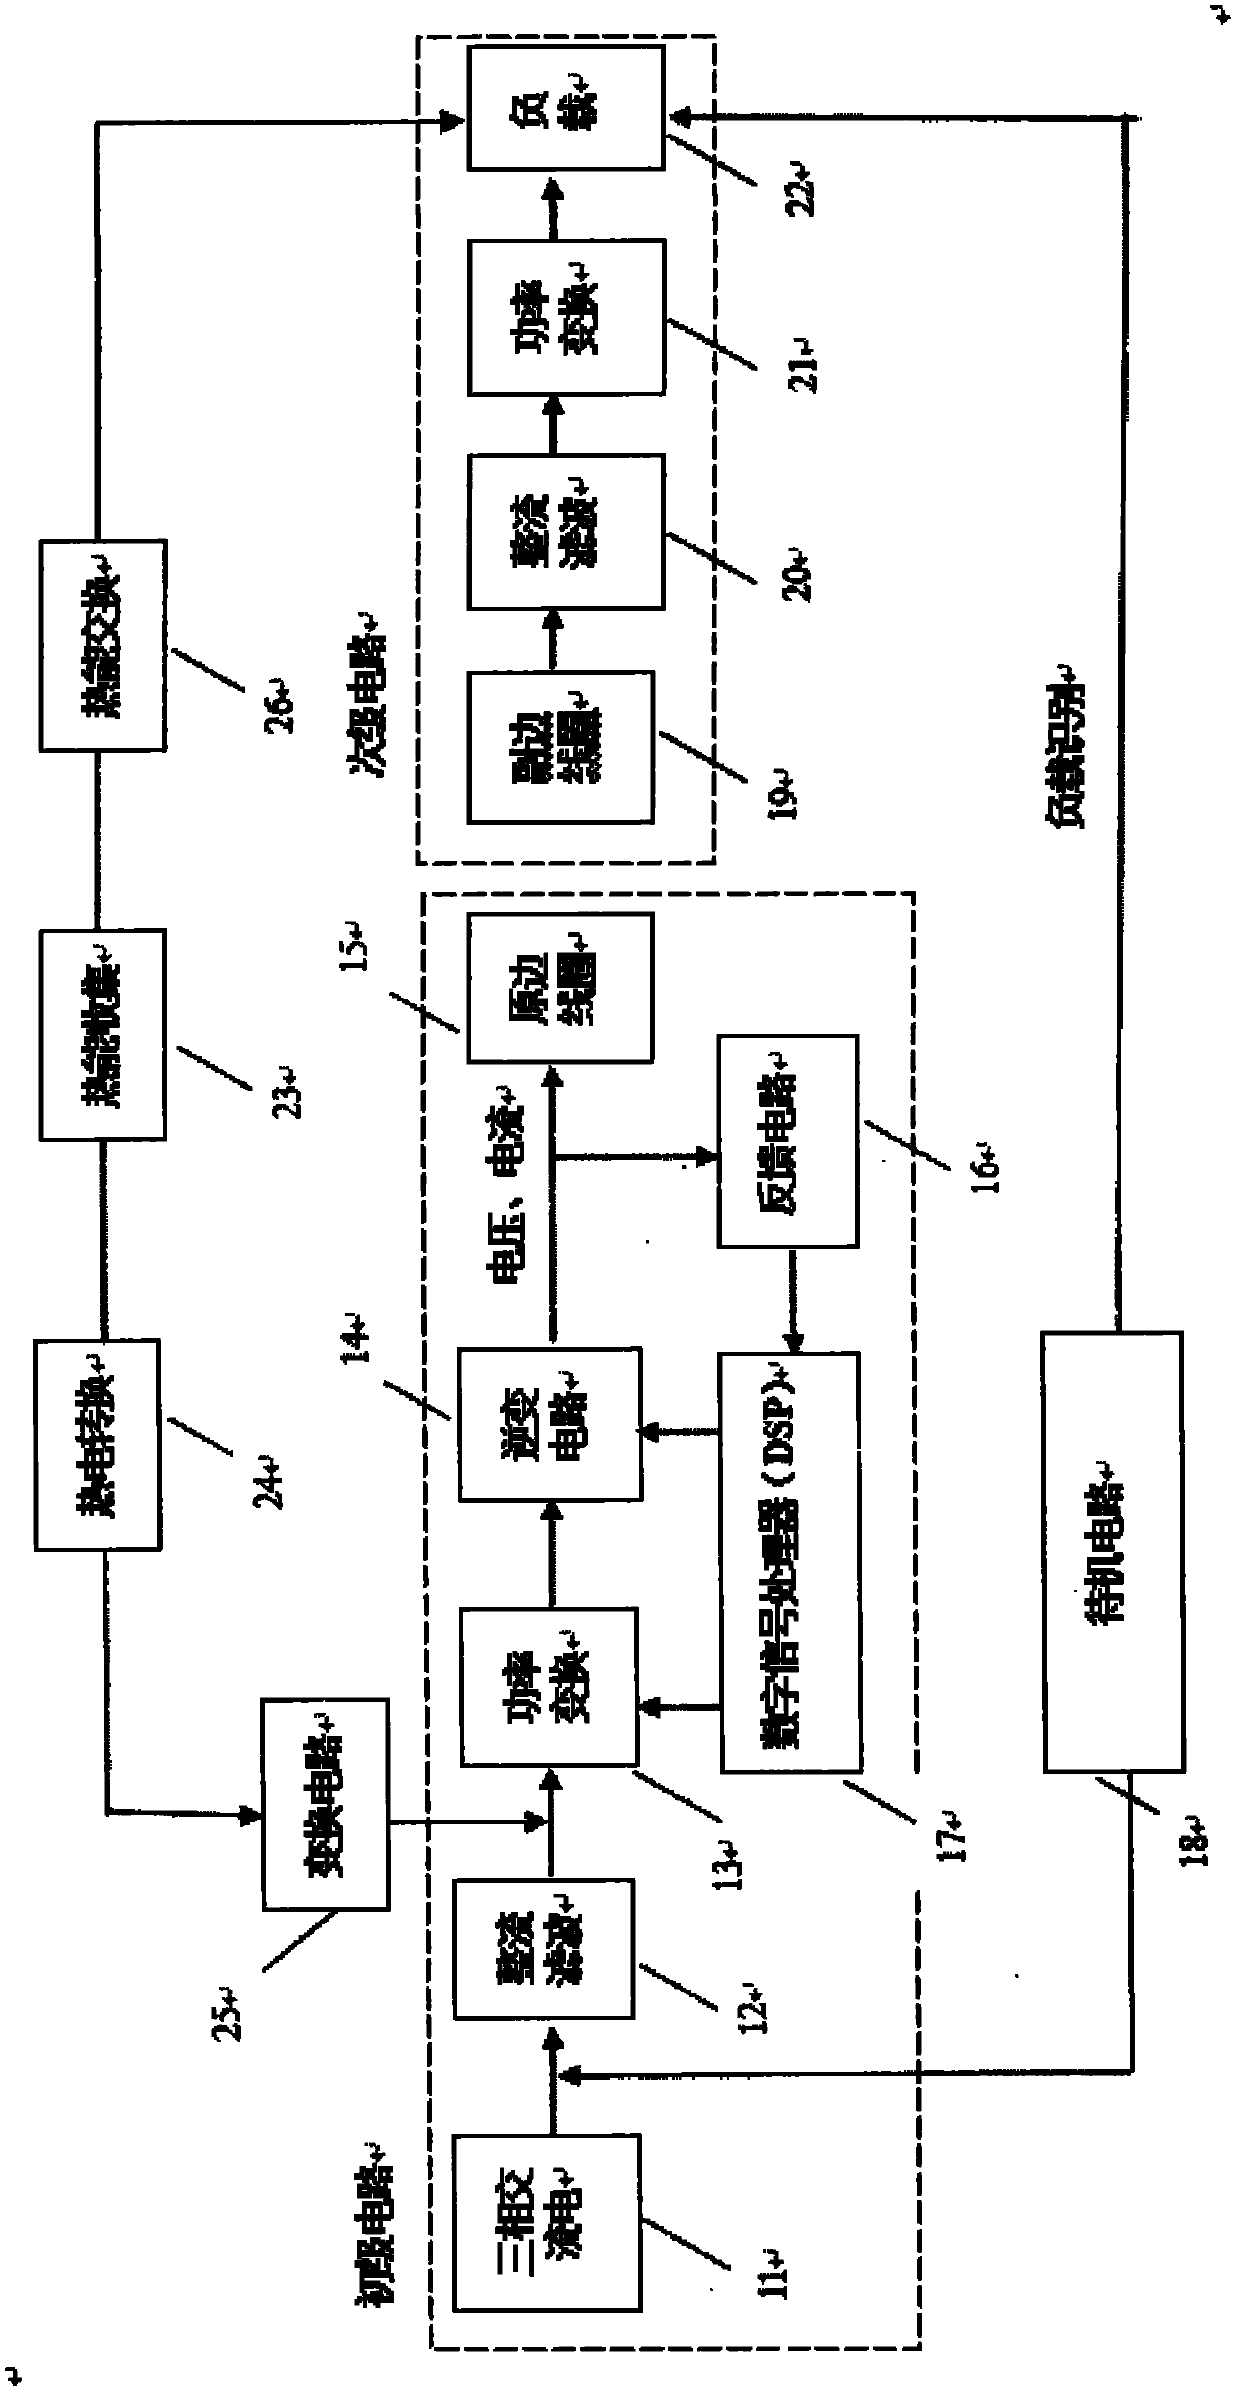 Non-contact type high-power energy transmission system and application